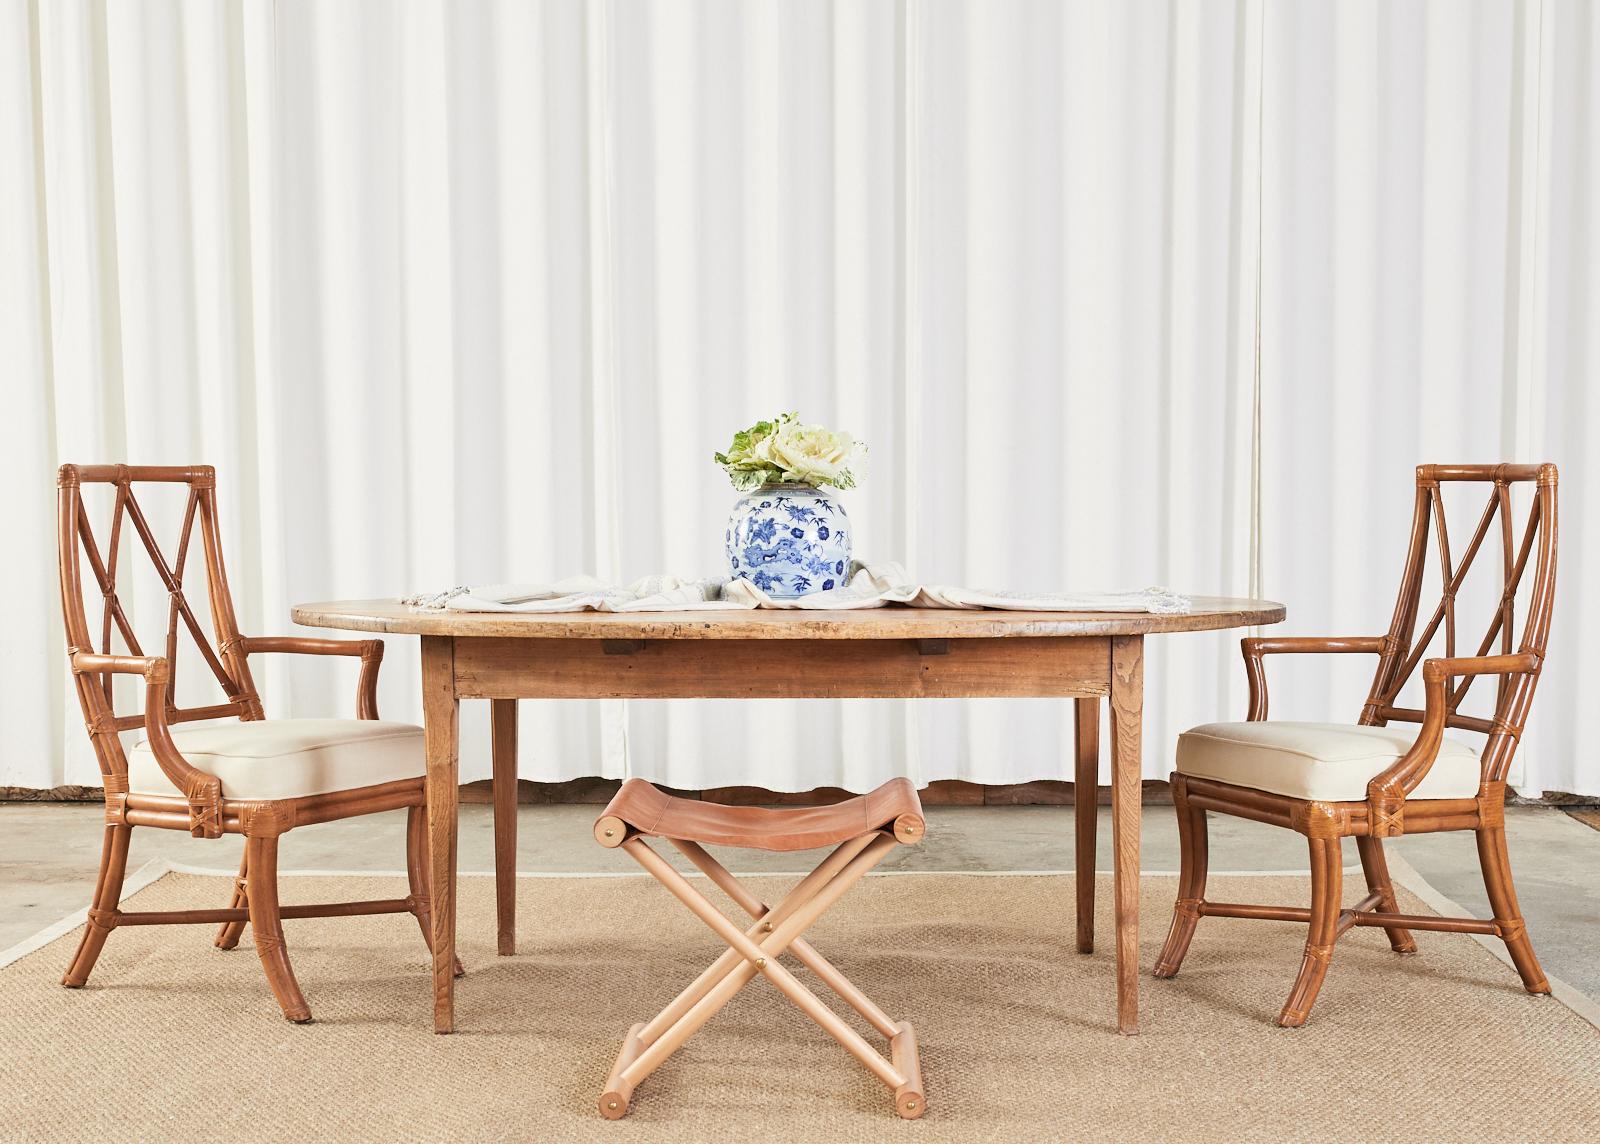 Gorgeous set of four organic modern dining chairs hand-crafted from rattan made in the manner and style of McGuire by David Francis Vero Beach, Florida. The set consists of one side chair and three armchairs measuring 24 inches wide and having 25